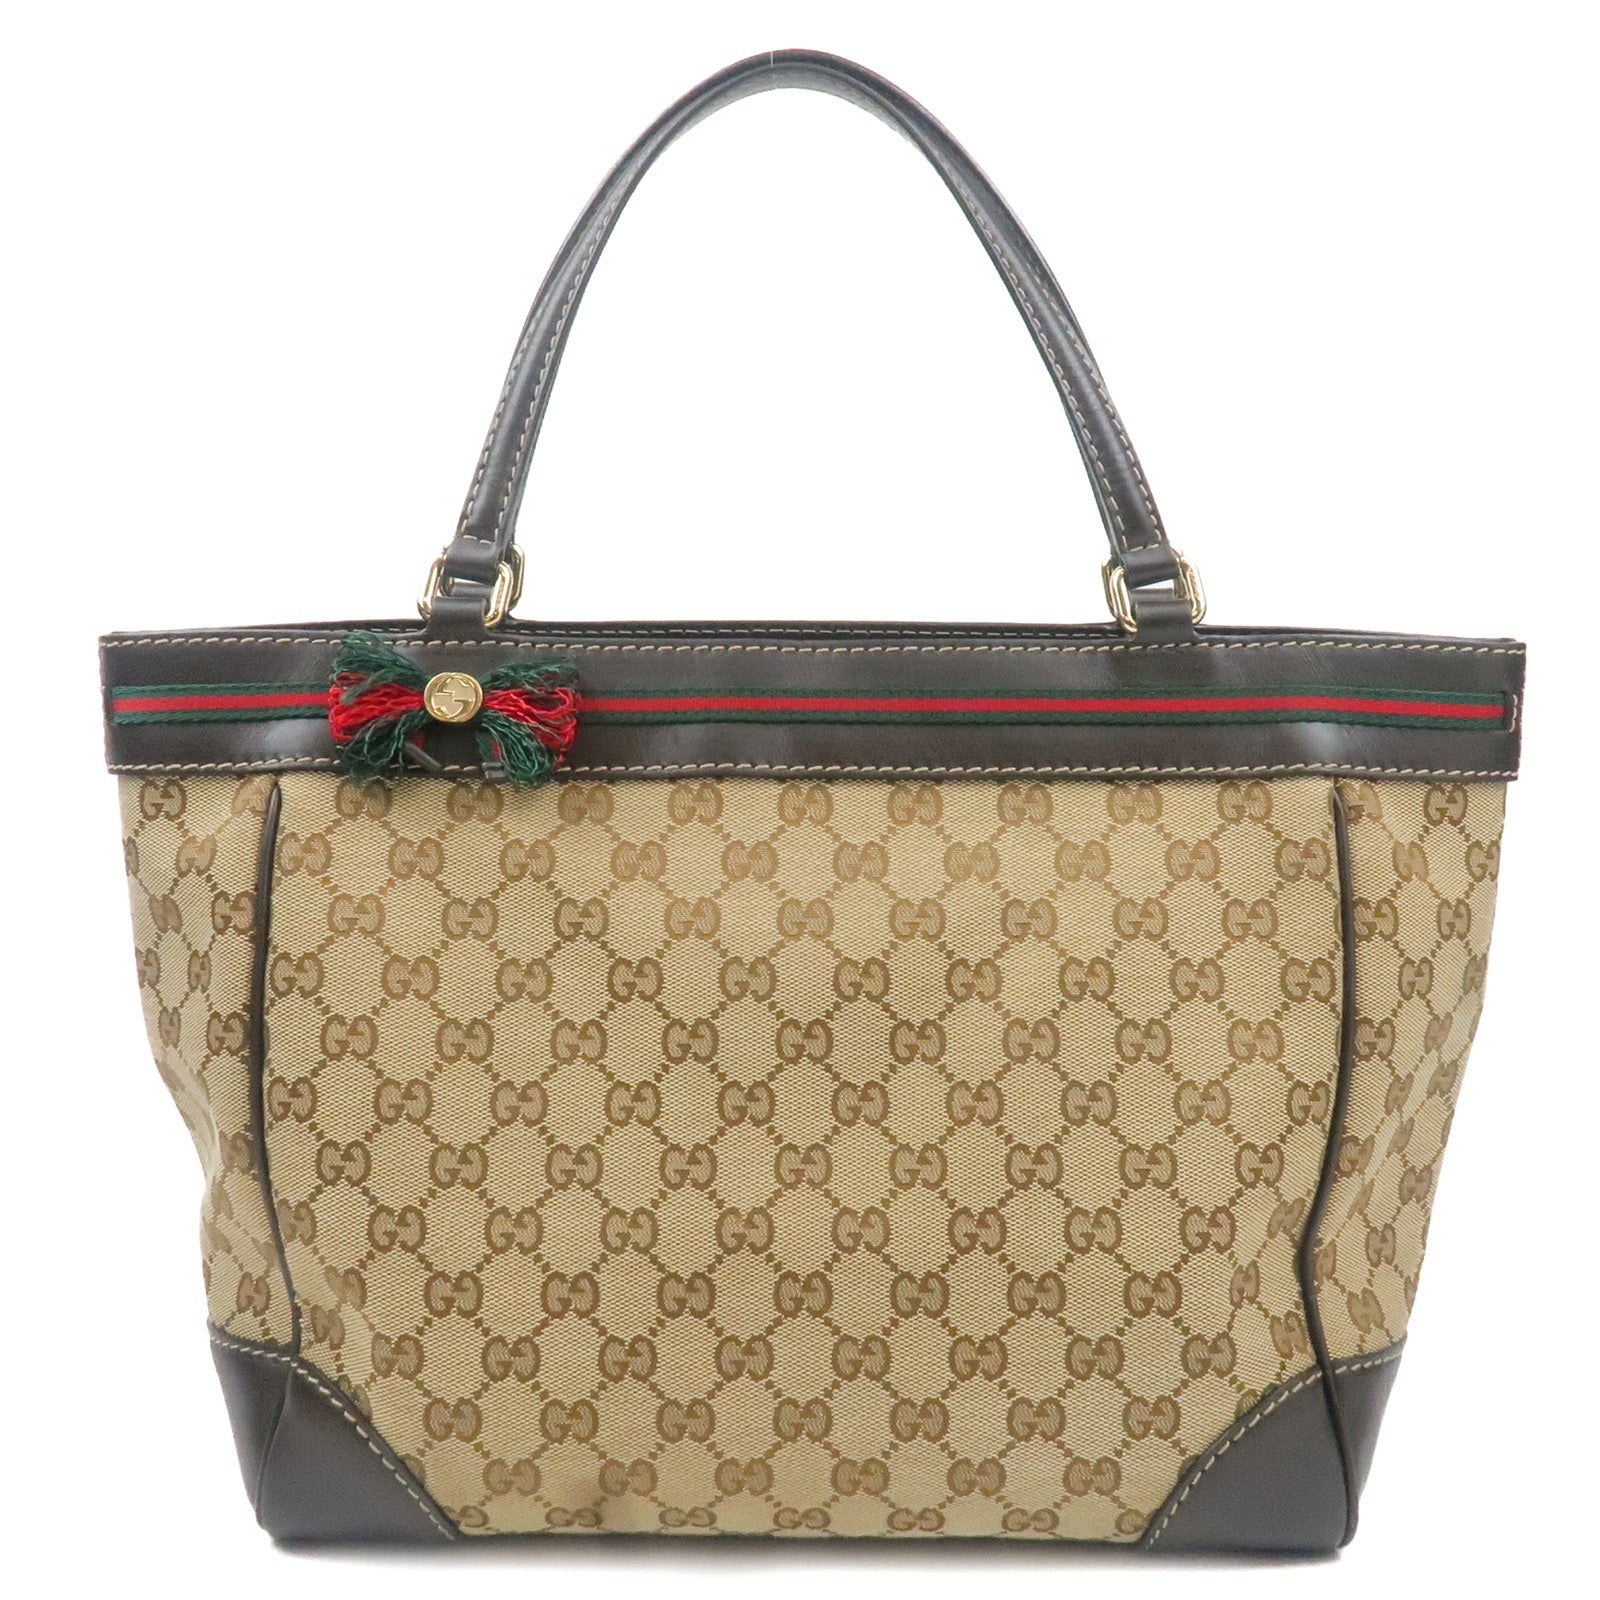 GUCCI-Sherry-Mayfair-GG-Canvas-Leather-Tote-Bag-Beige-257061